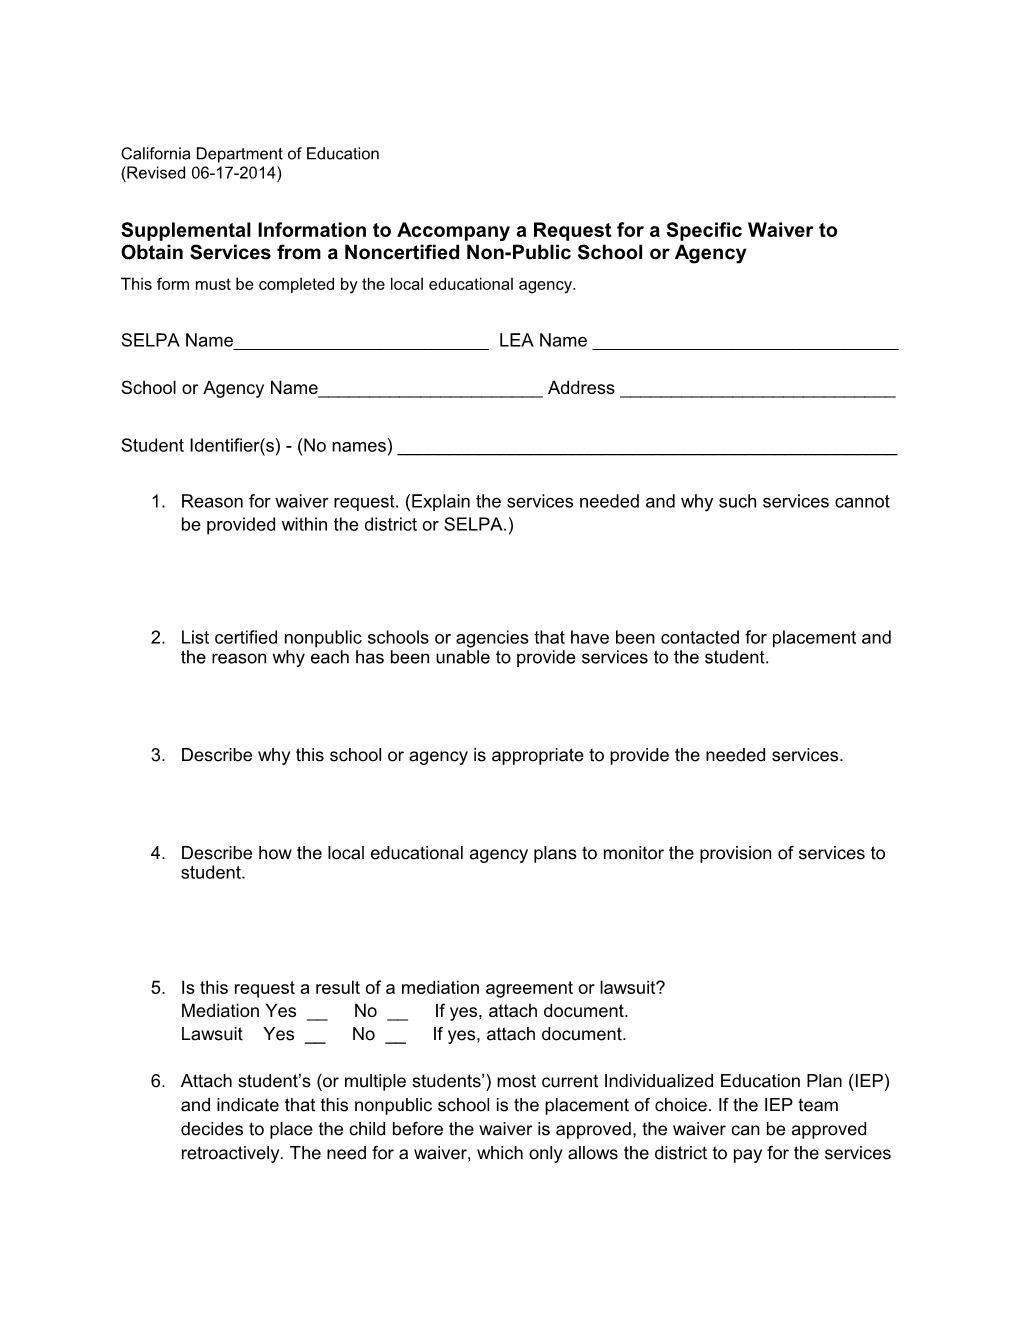 NPS Waiver Form - Waivers (CA Dept Of Education)